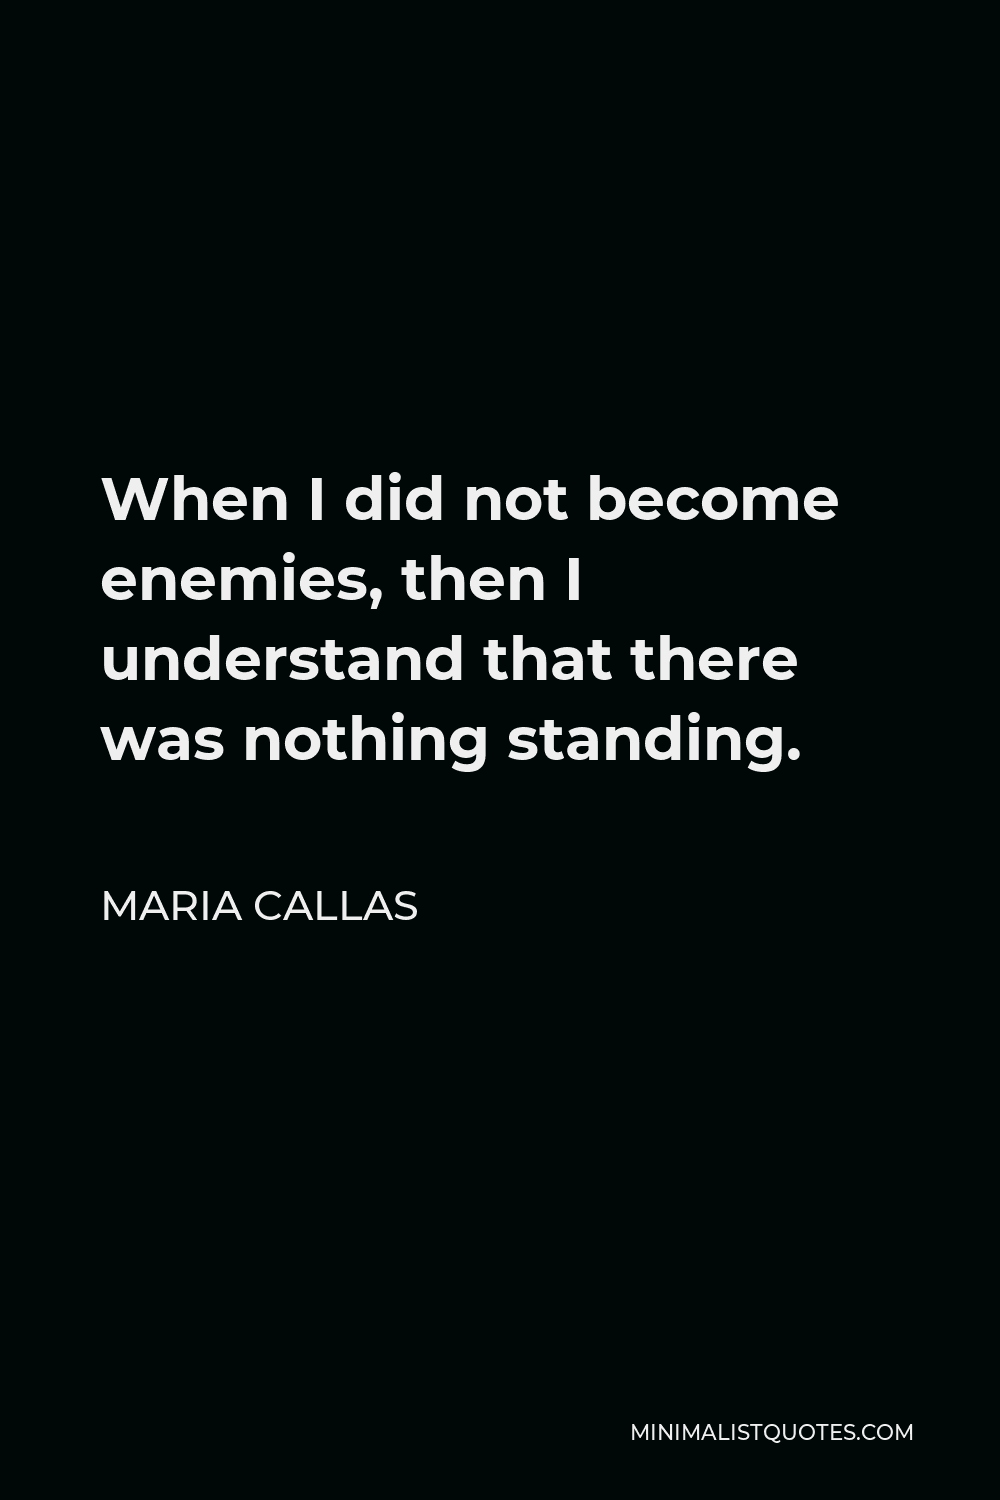 Maria Callas Quote - When I did not become enemies, then I understand that there was nothing standing.